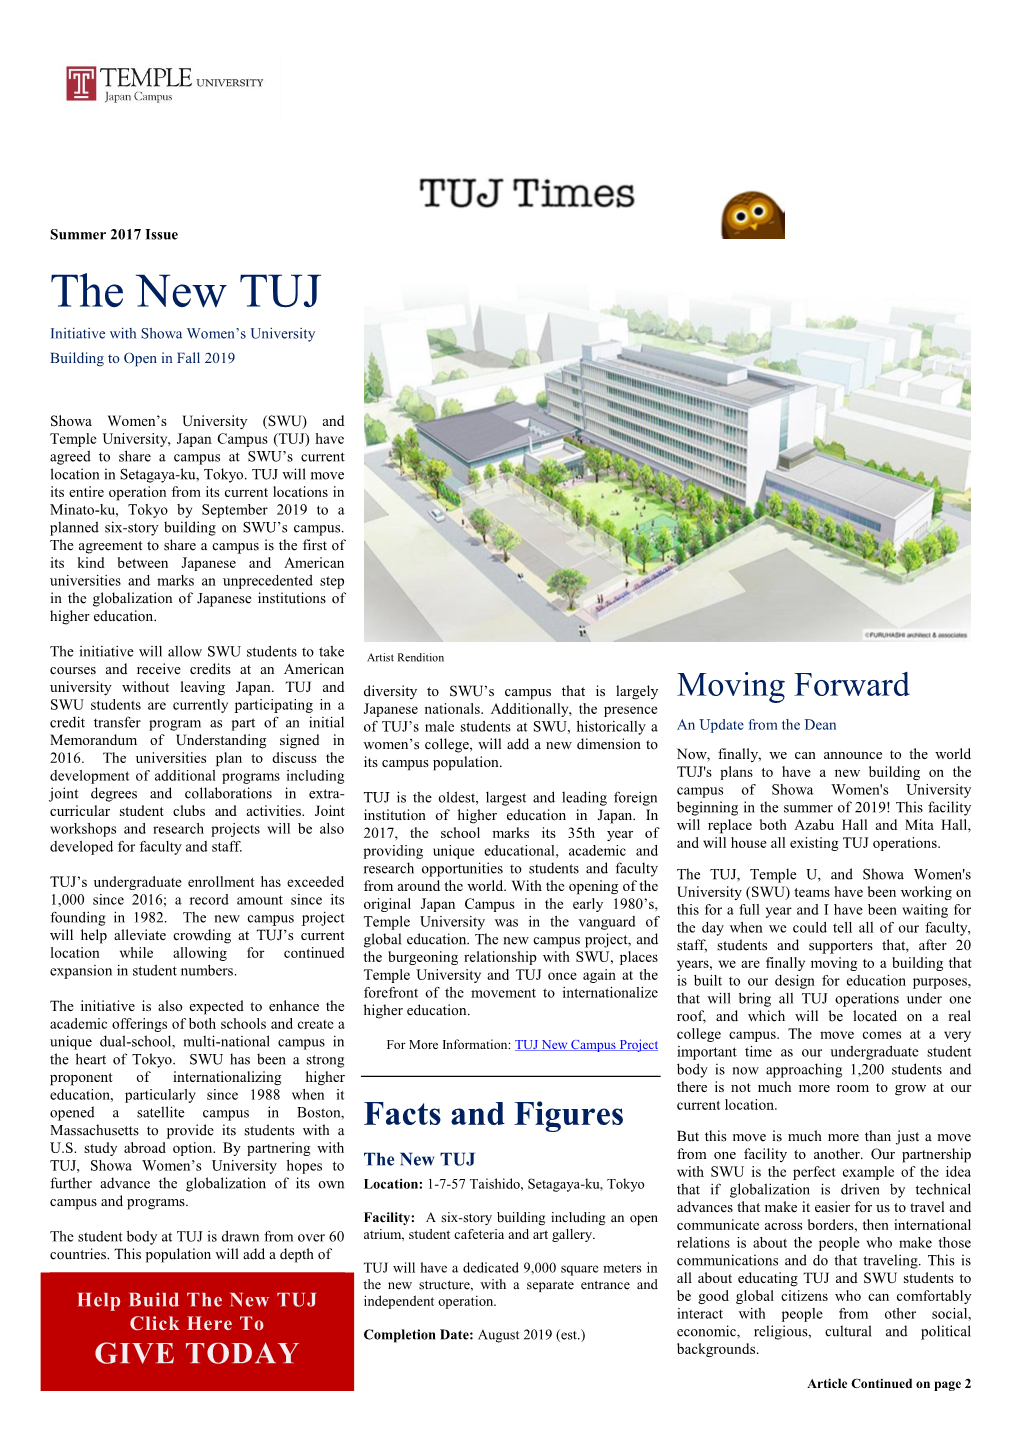 The New TUJ Initiative with Showa Women’S University Building to Open in Fall 2019